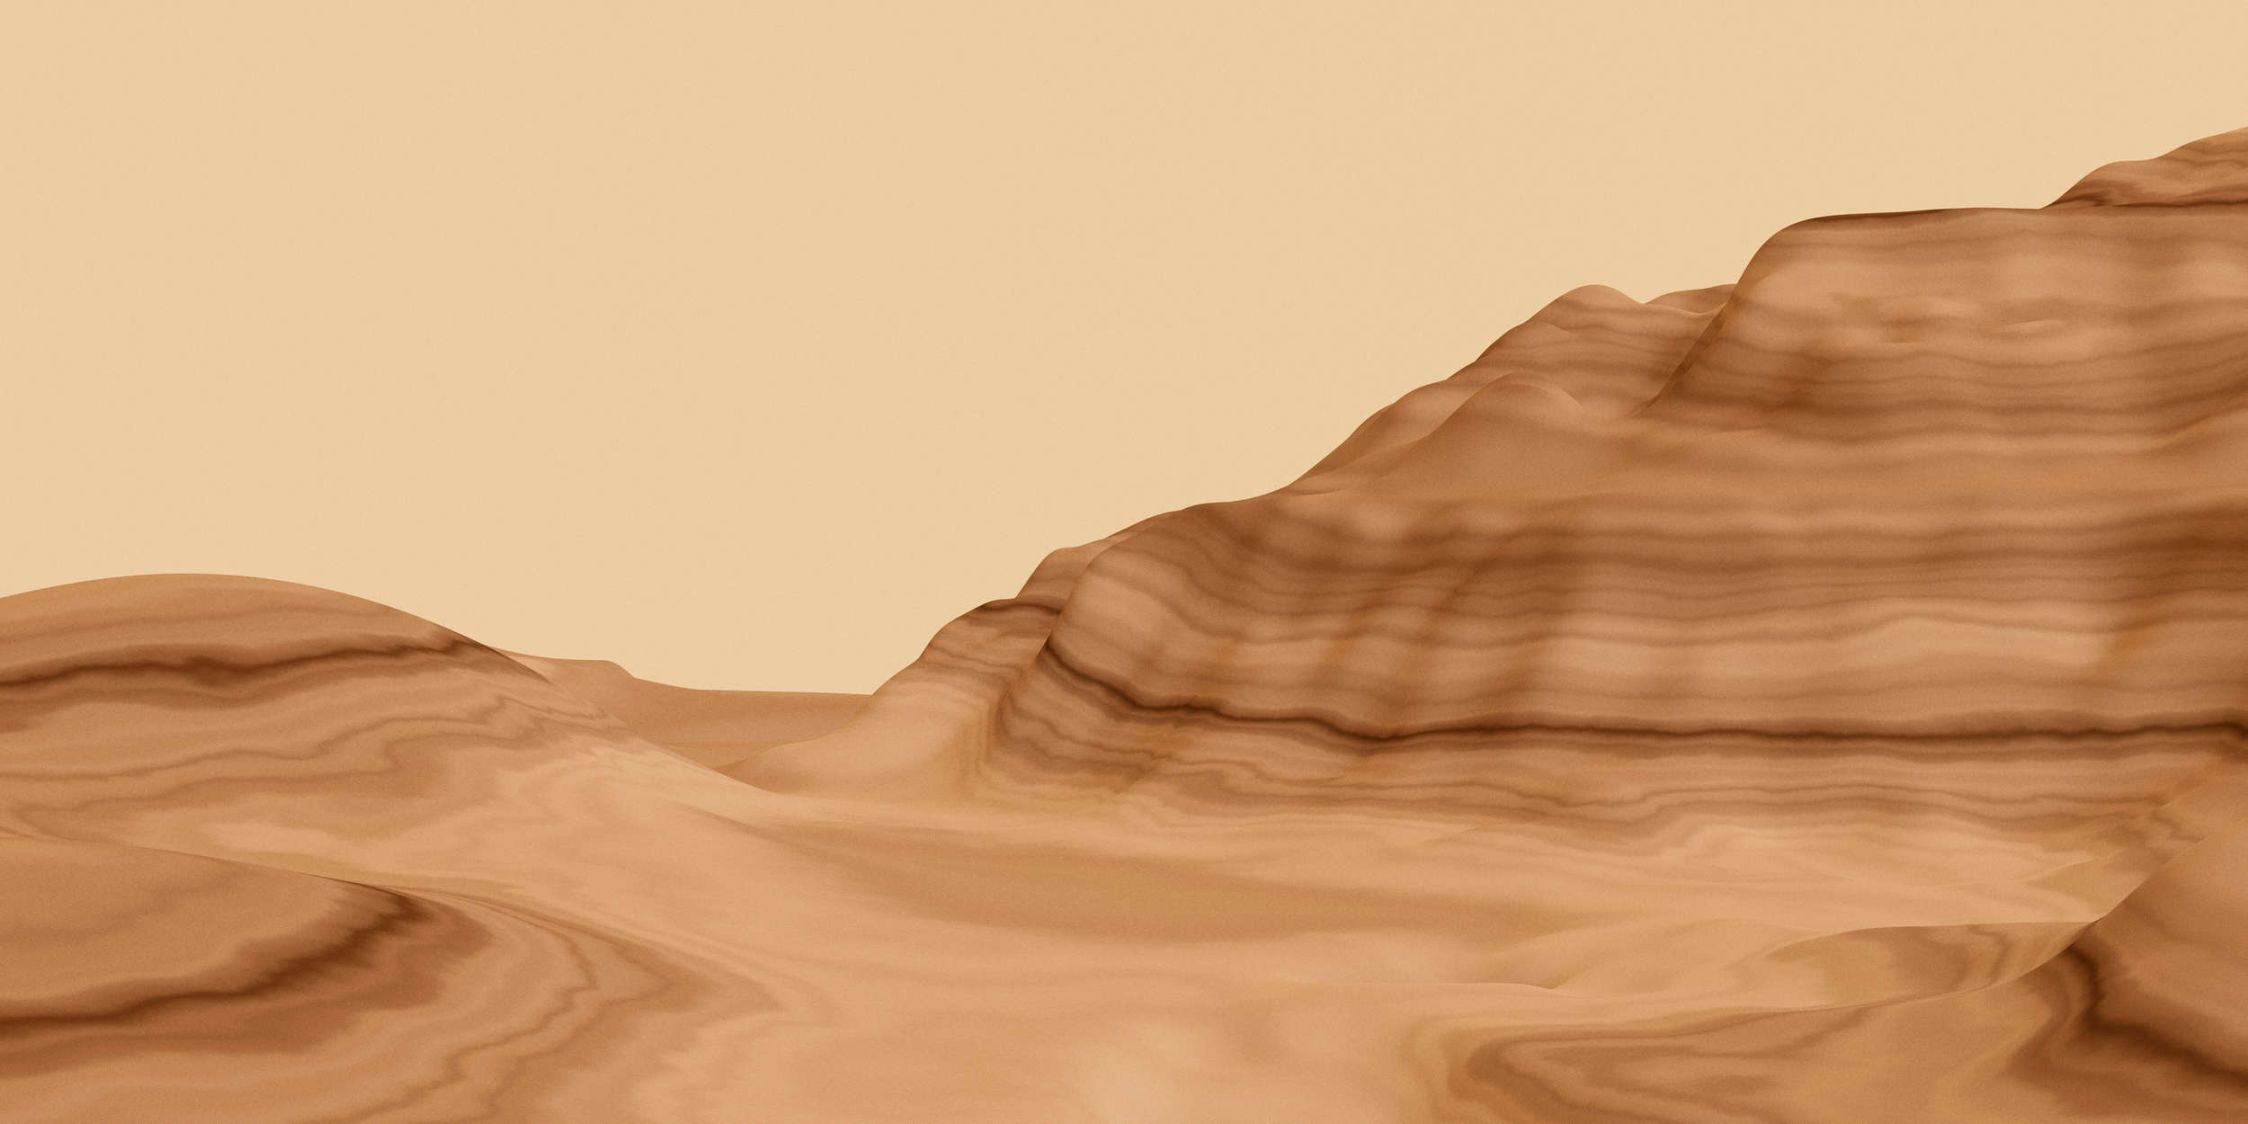             Photo wallpaper »luke« - Abstract desert landscape - Smooth, slightly pearlescent non-woven fabric
        